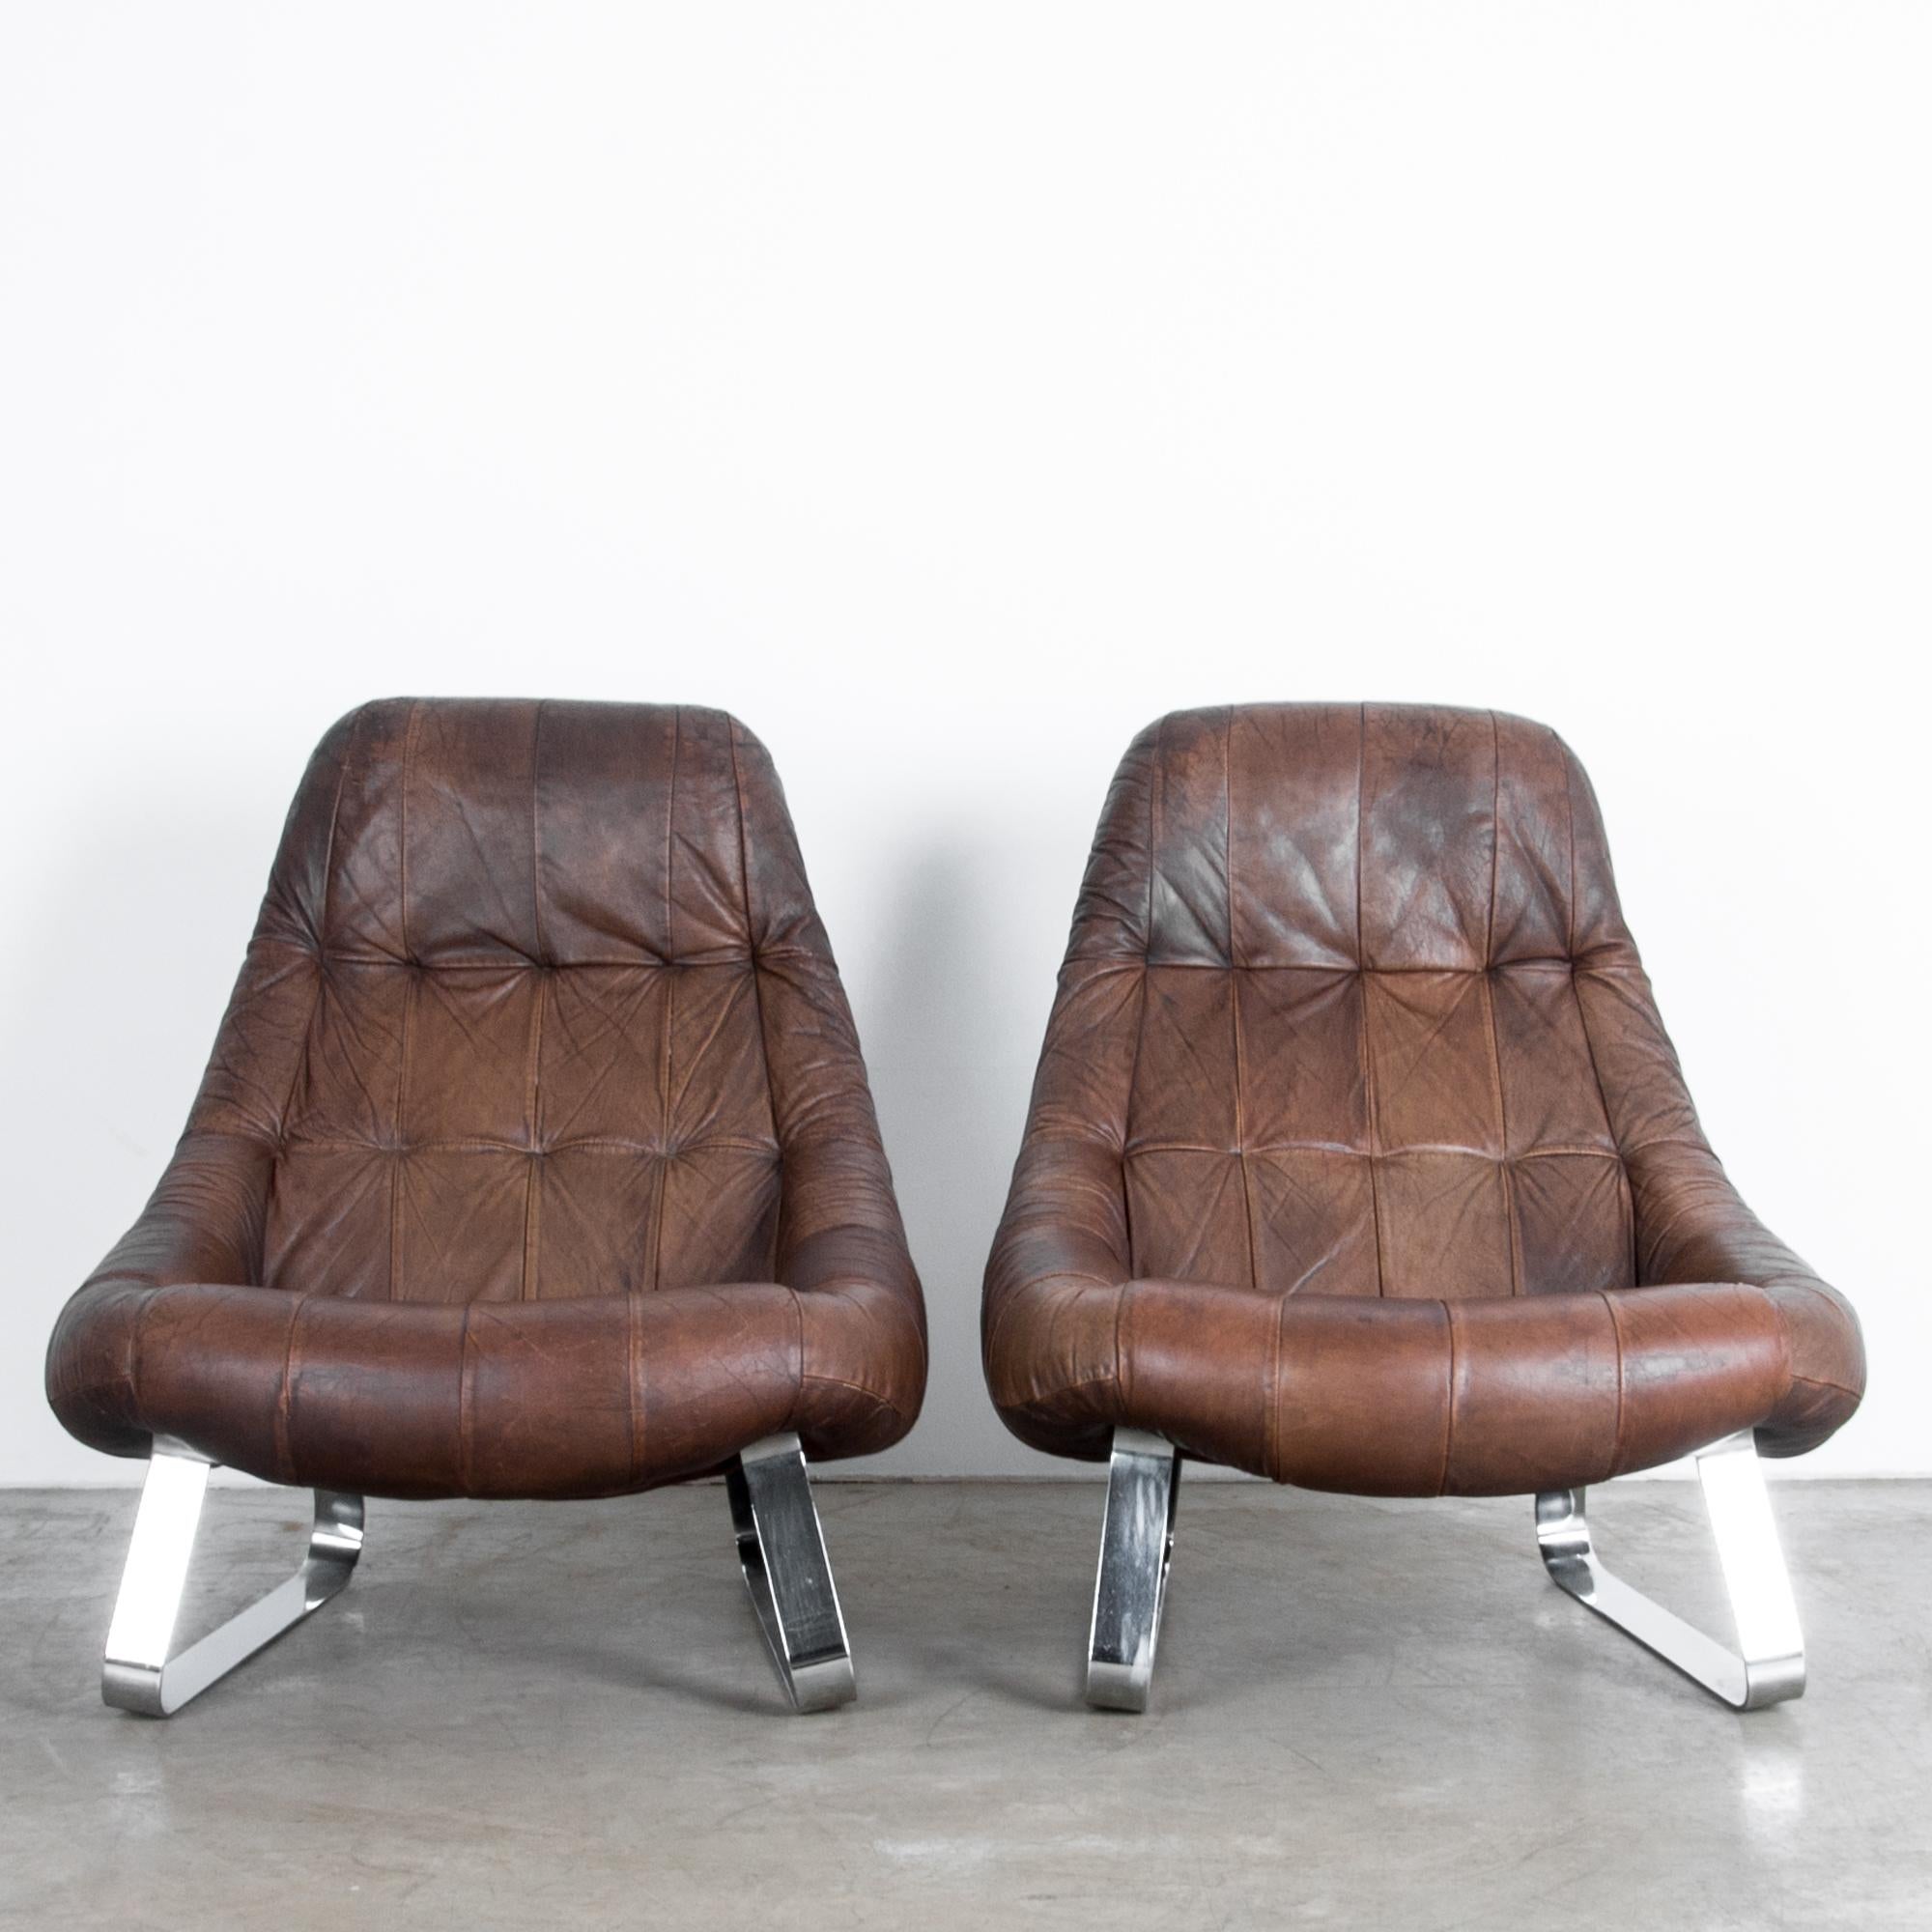 Brazilian Percival Lafer Dark Brown Chrome Leather Earth Chair with Ottoman, a Pair